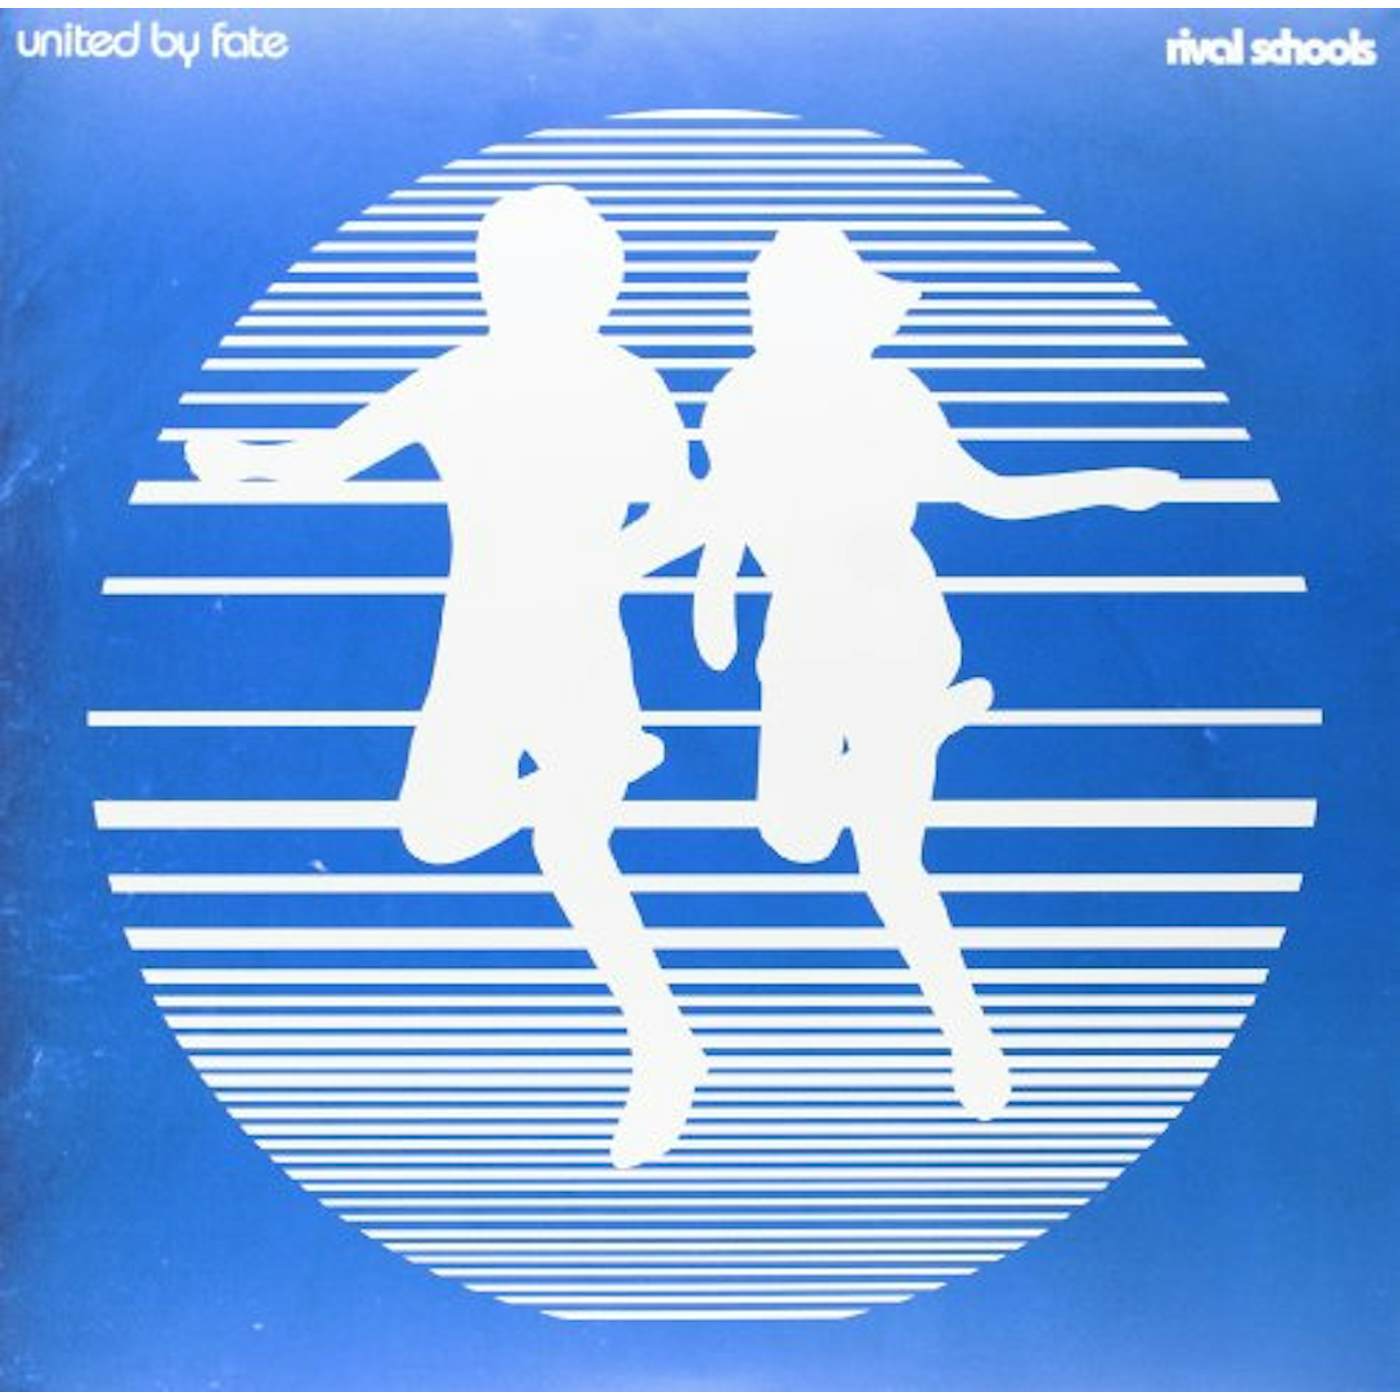 Rival Schools United By Fate Vinyl Record